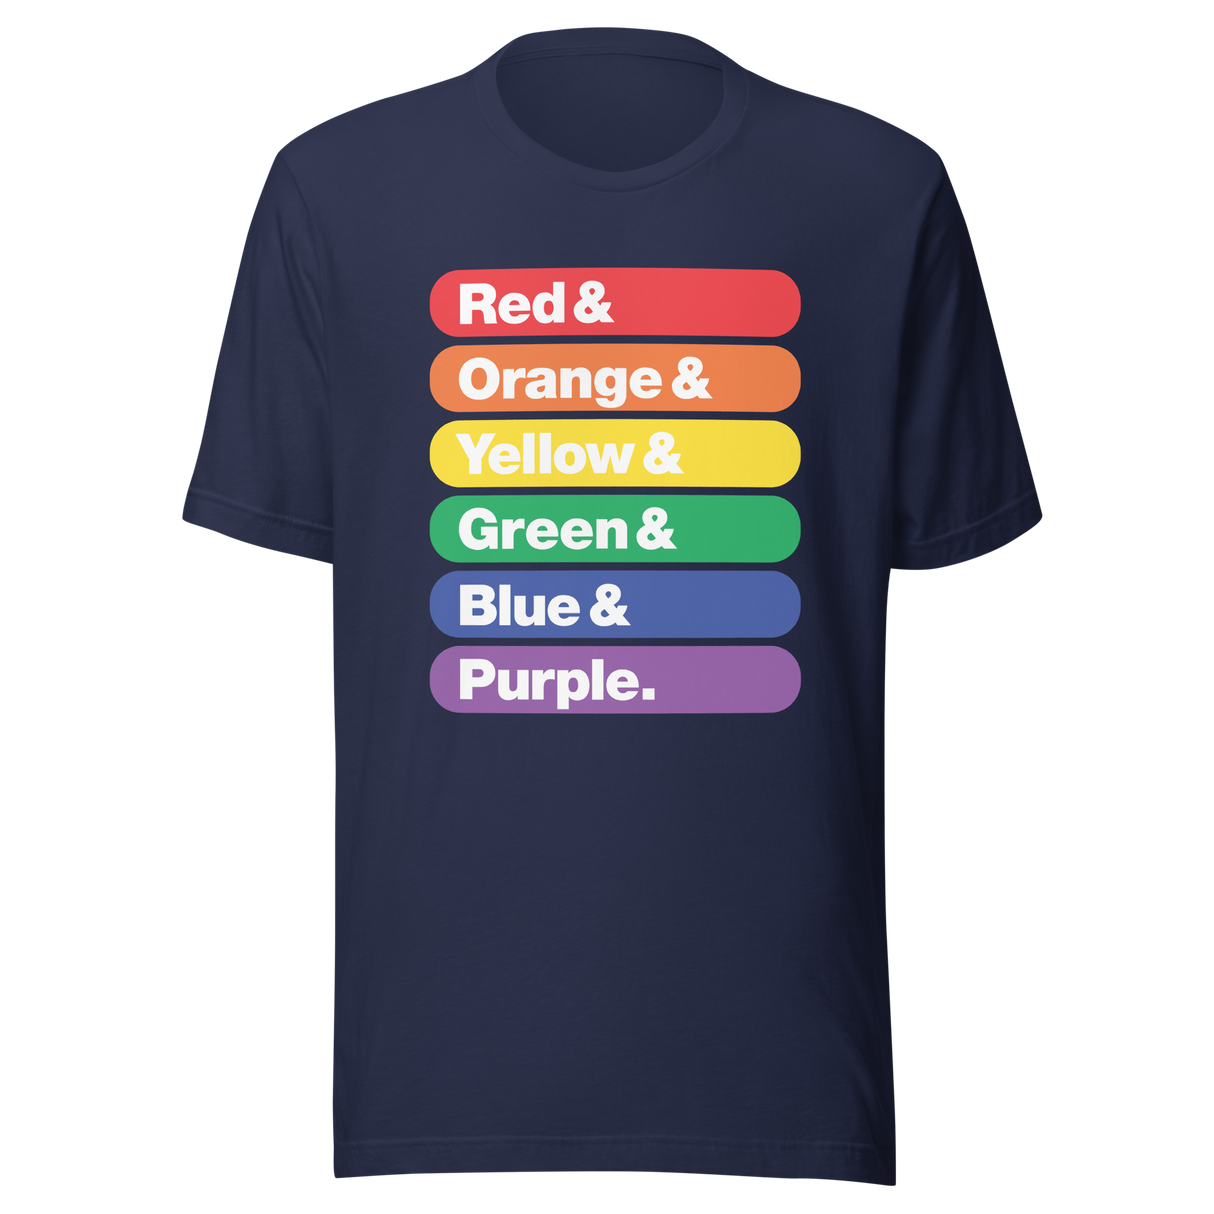 red-orange-yellow-green-blue-purple-blue-tee-green-t-shirt-orange-tee-lgbt-t-shirt-lifestyle-tee#color_navy